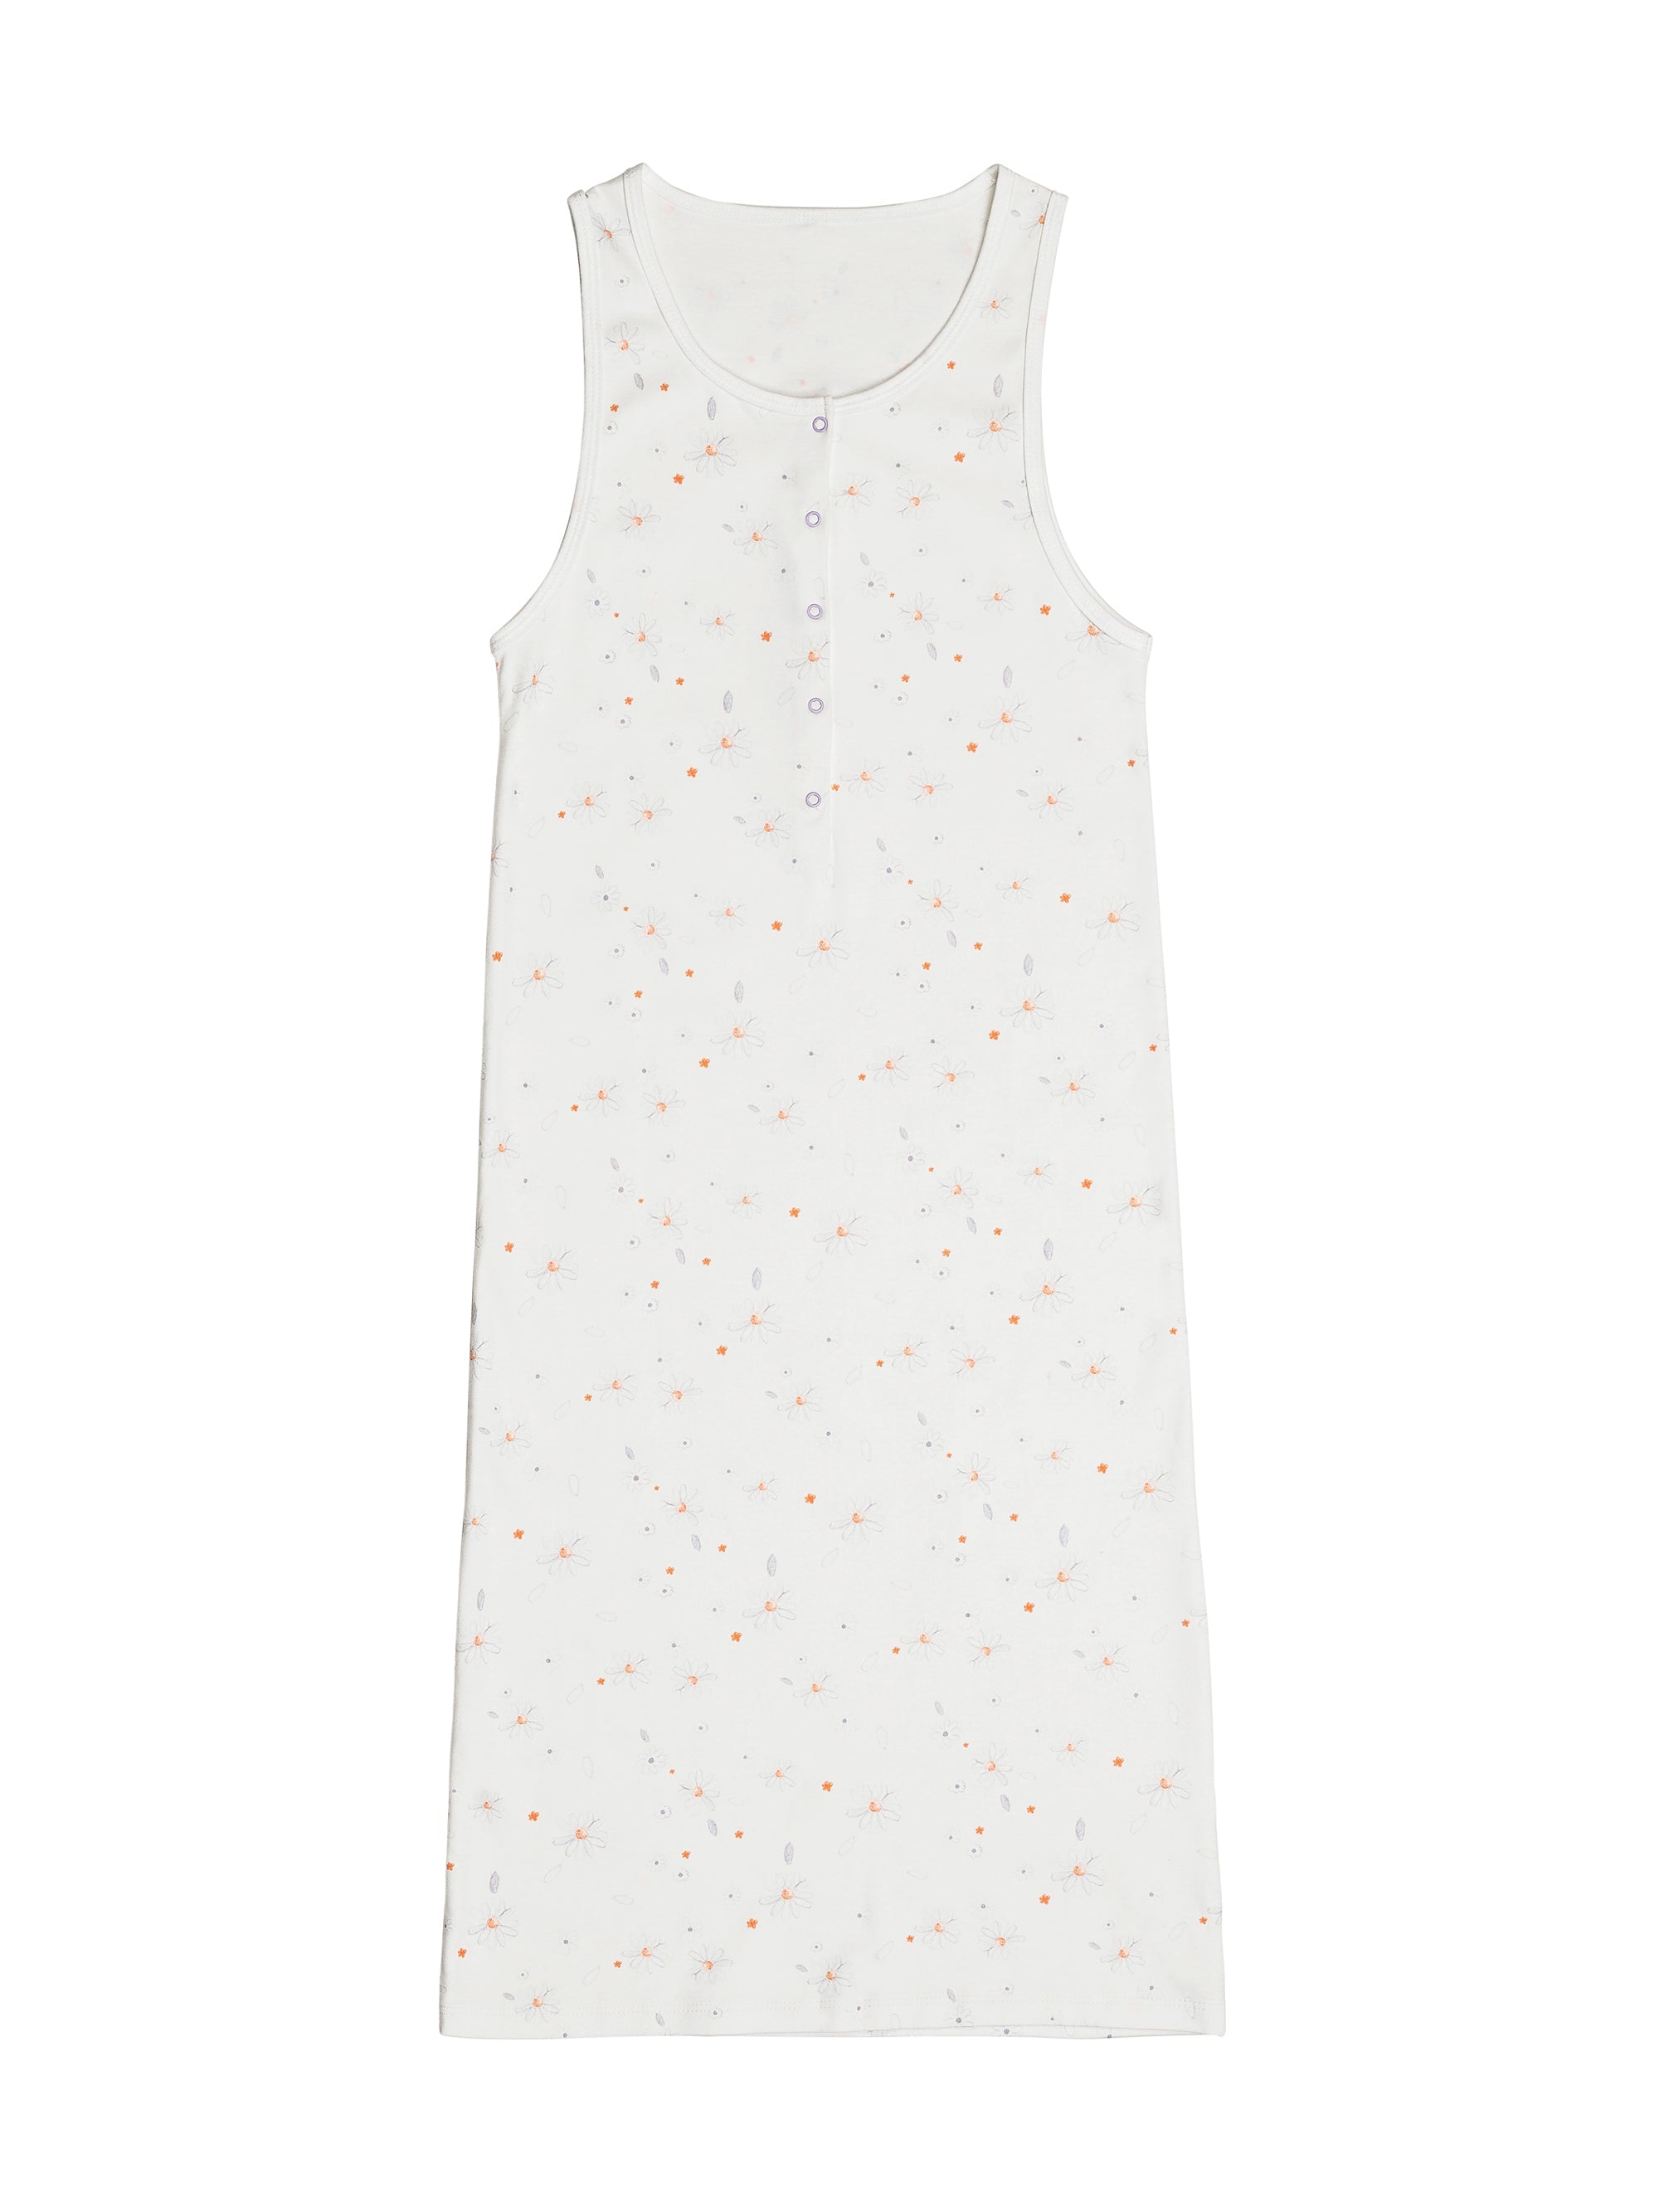 Woman's Nightgown - Shadow Floral